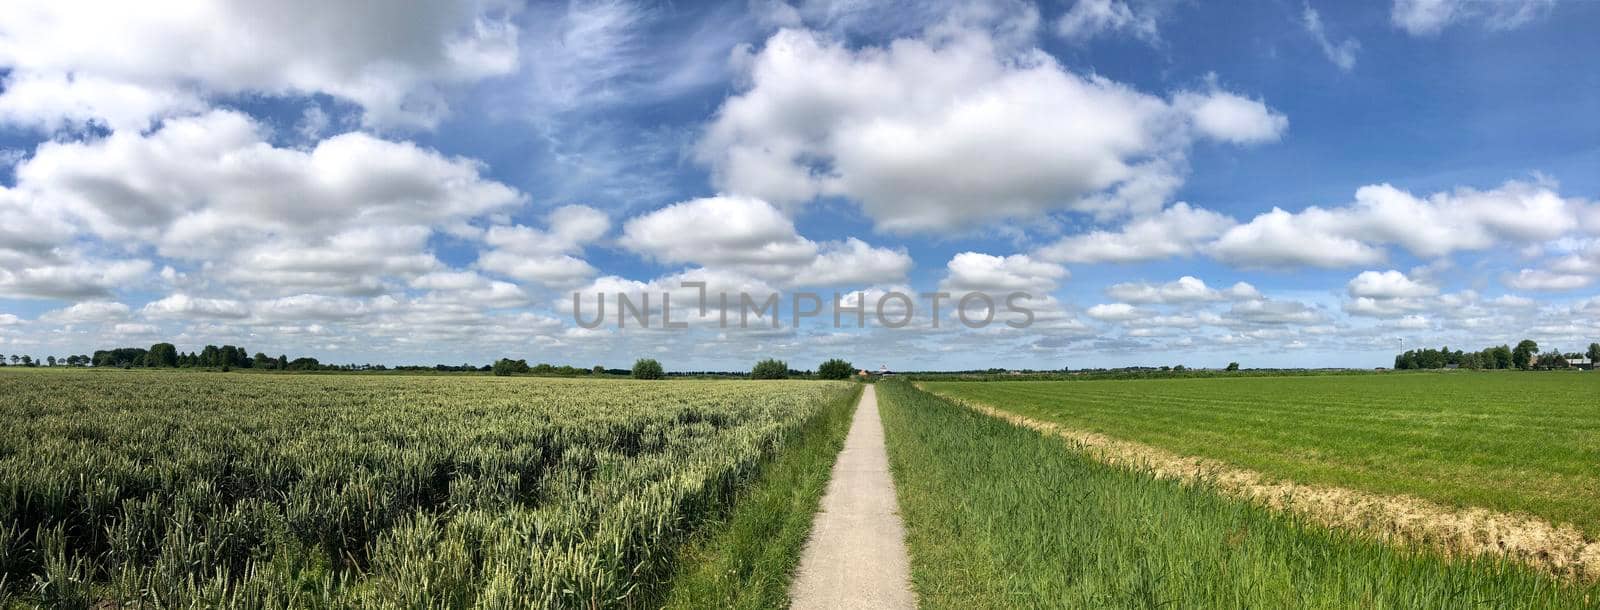 Walk and cycle path around Wirdum in Friesland The Netherlands